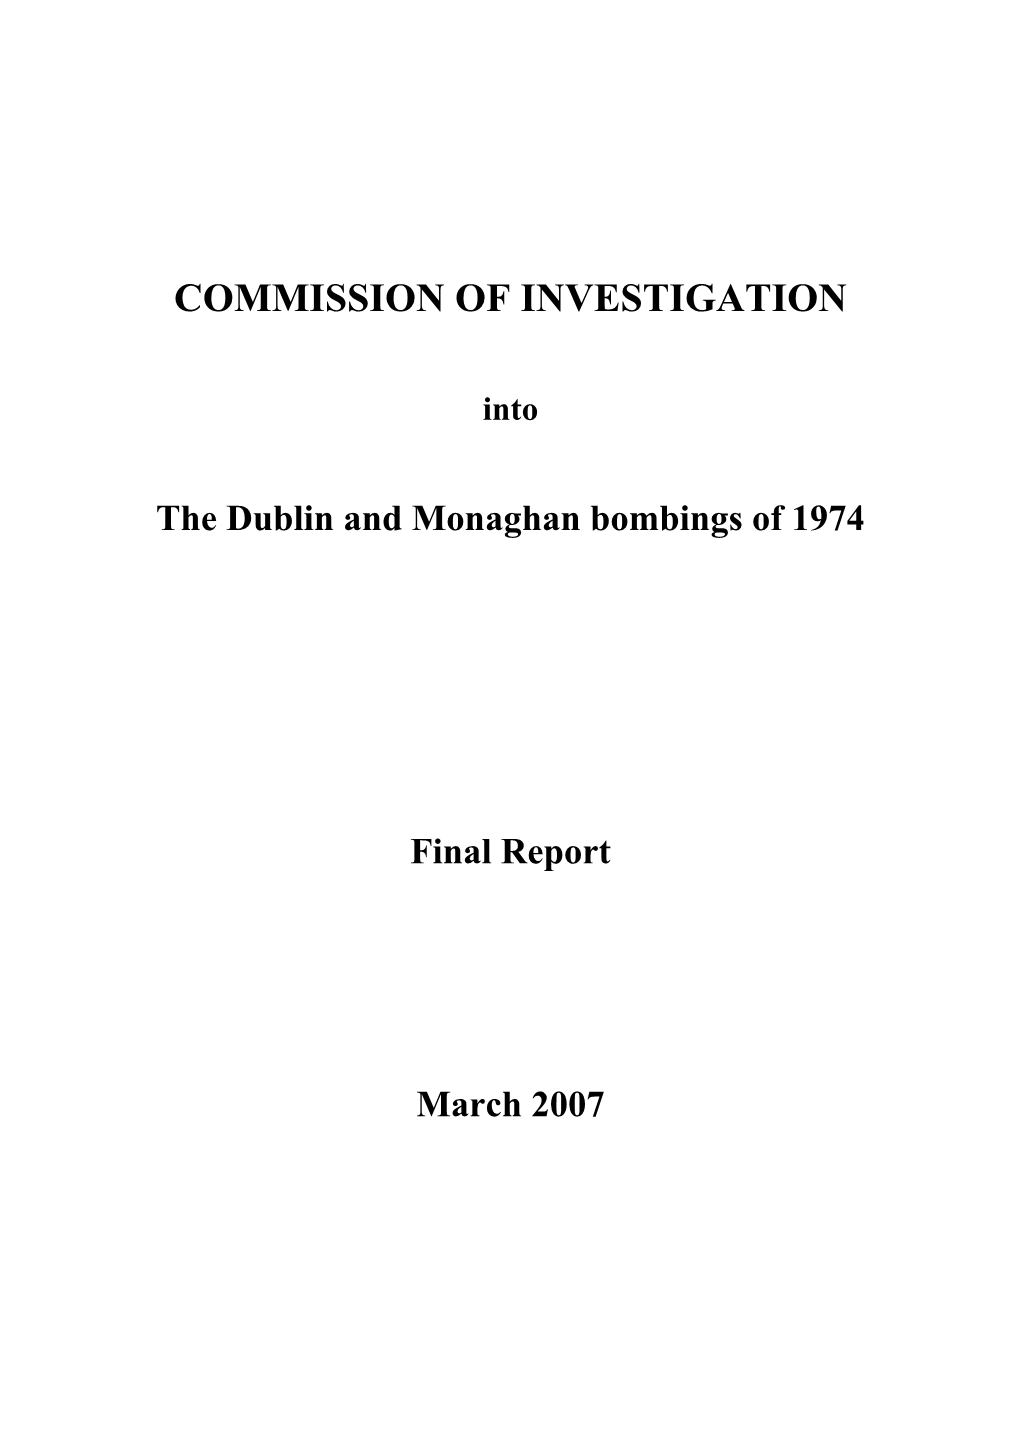 The Dublin and Monaghan Bombings of 1974 Final Report March 2007